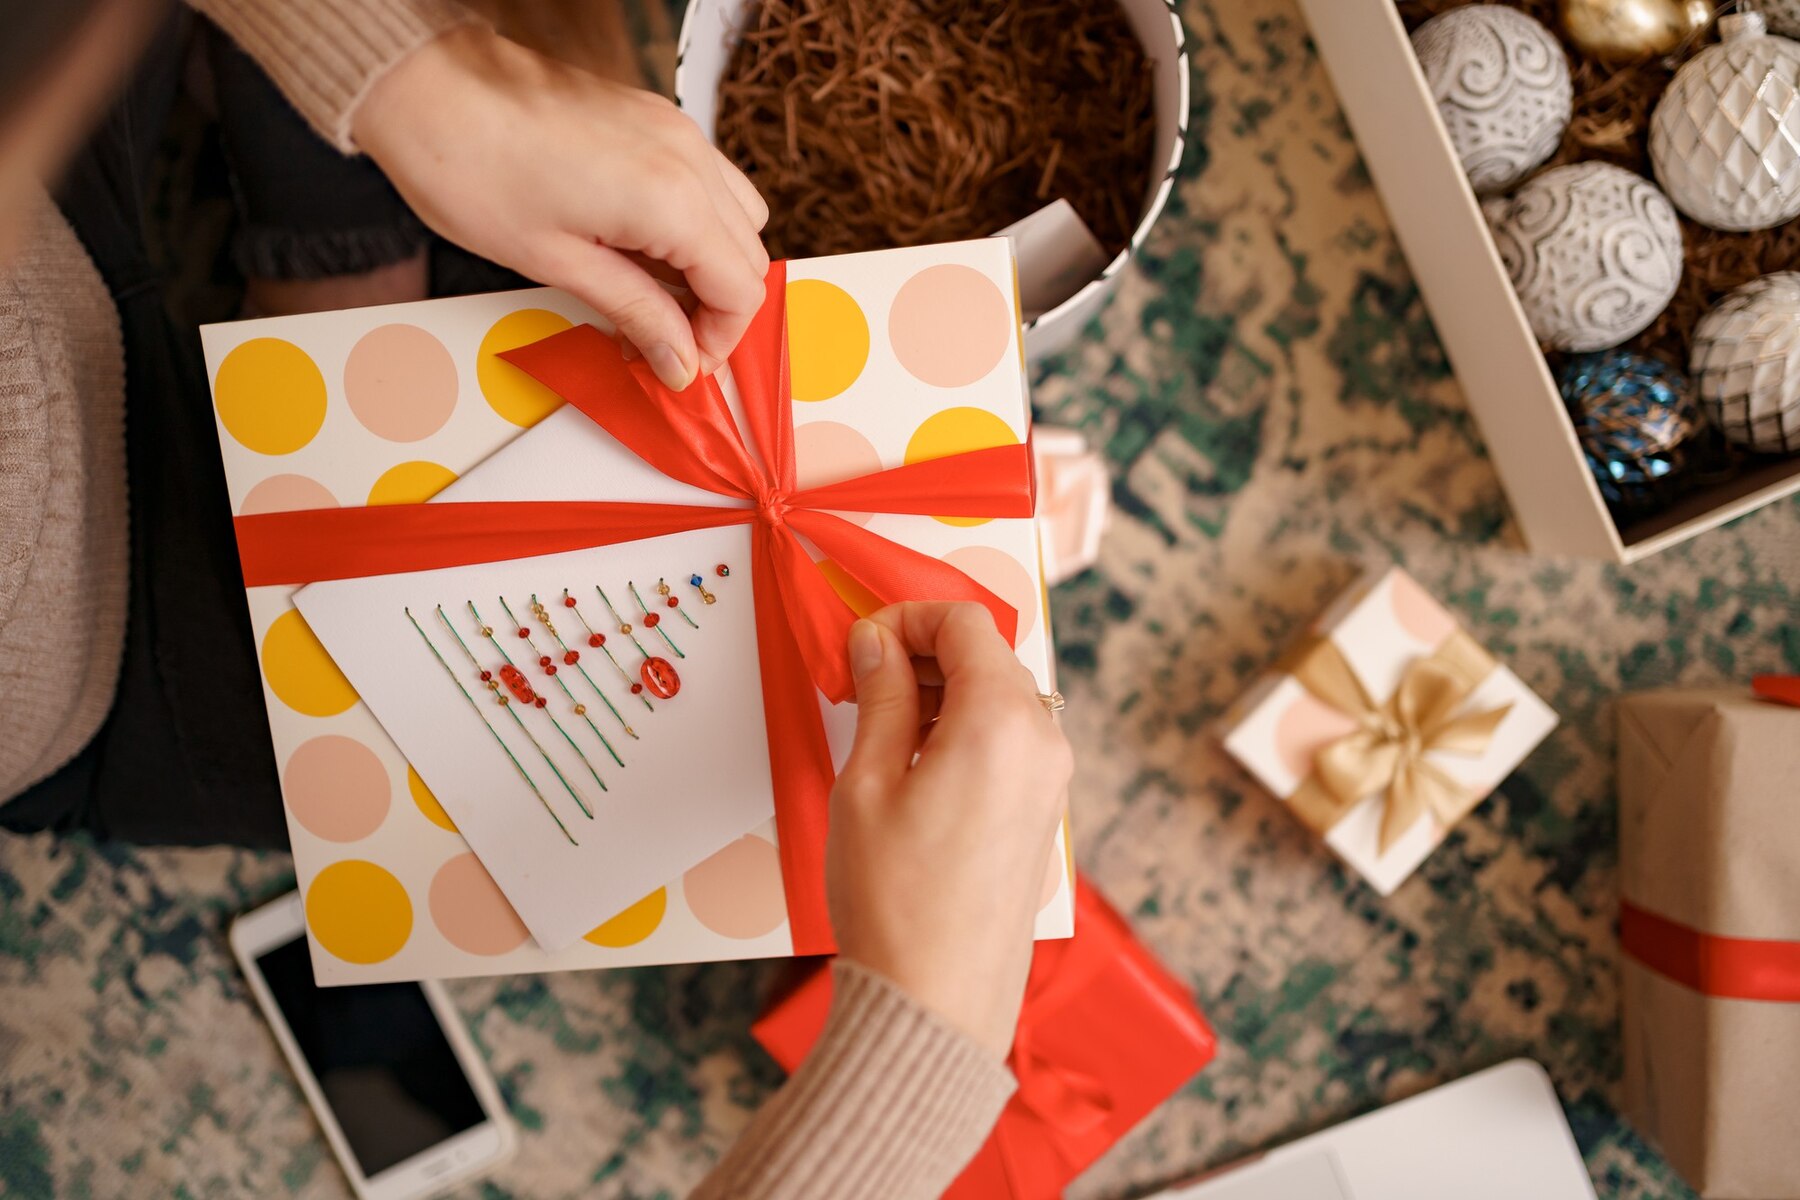 Customizing The Gift With A Personalized Note